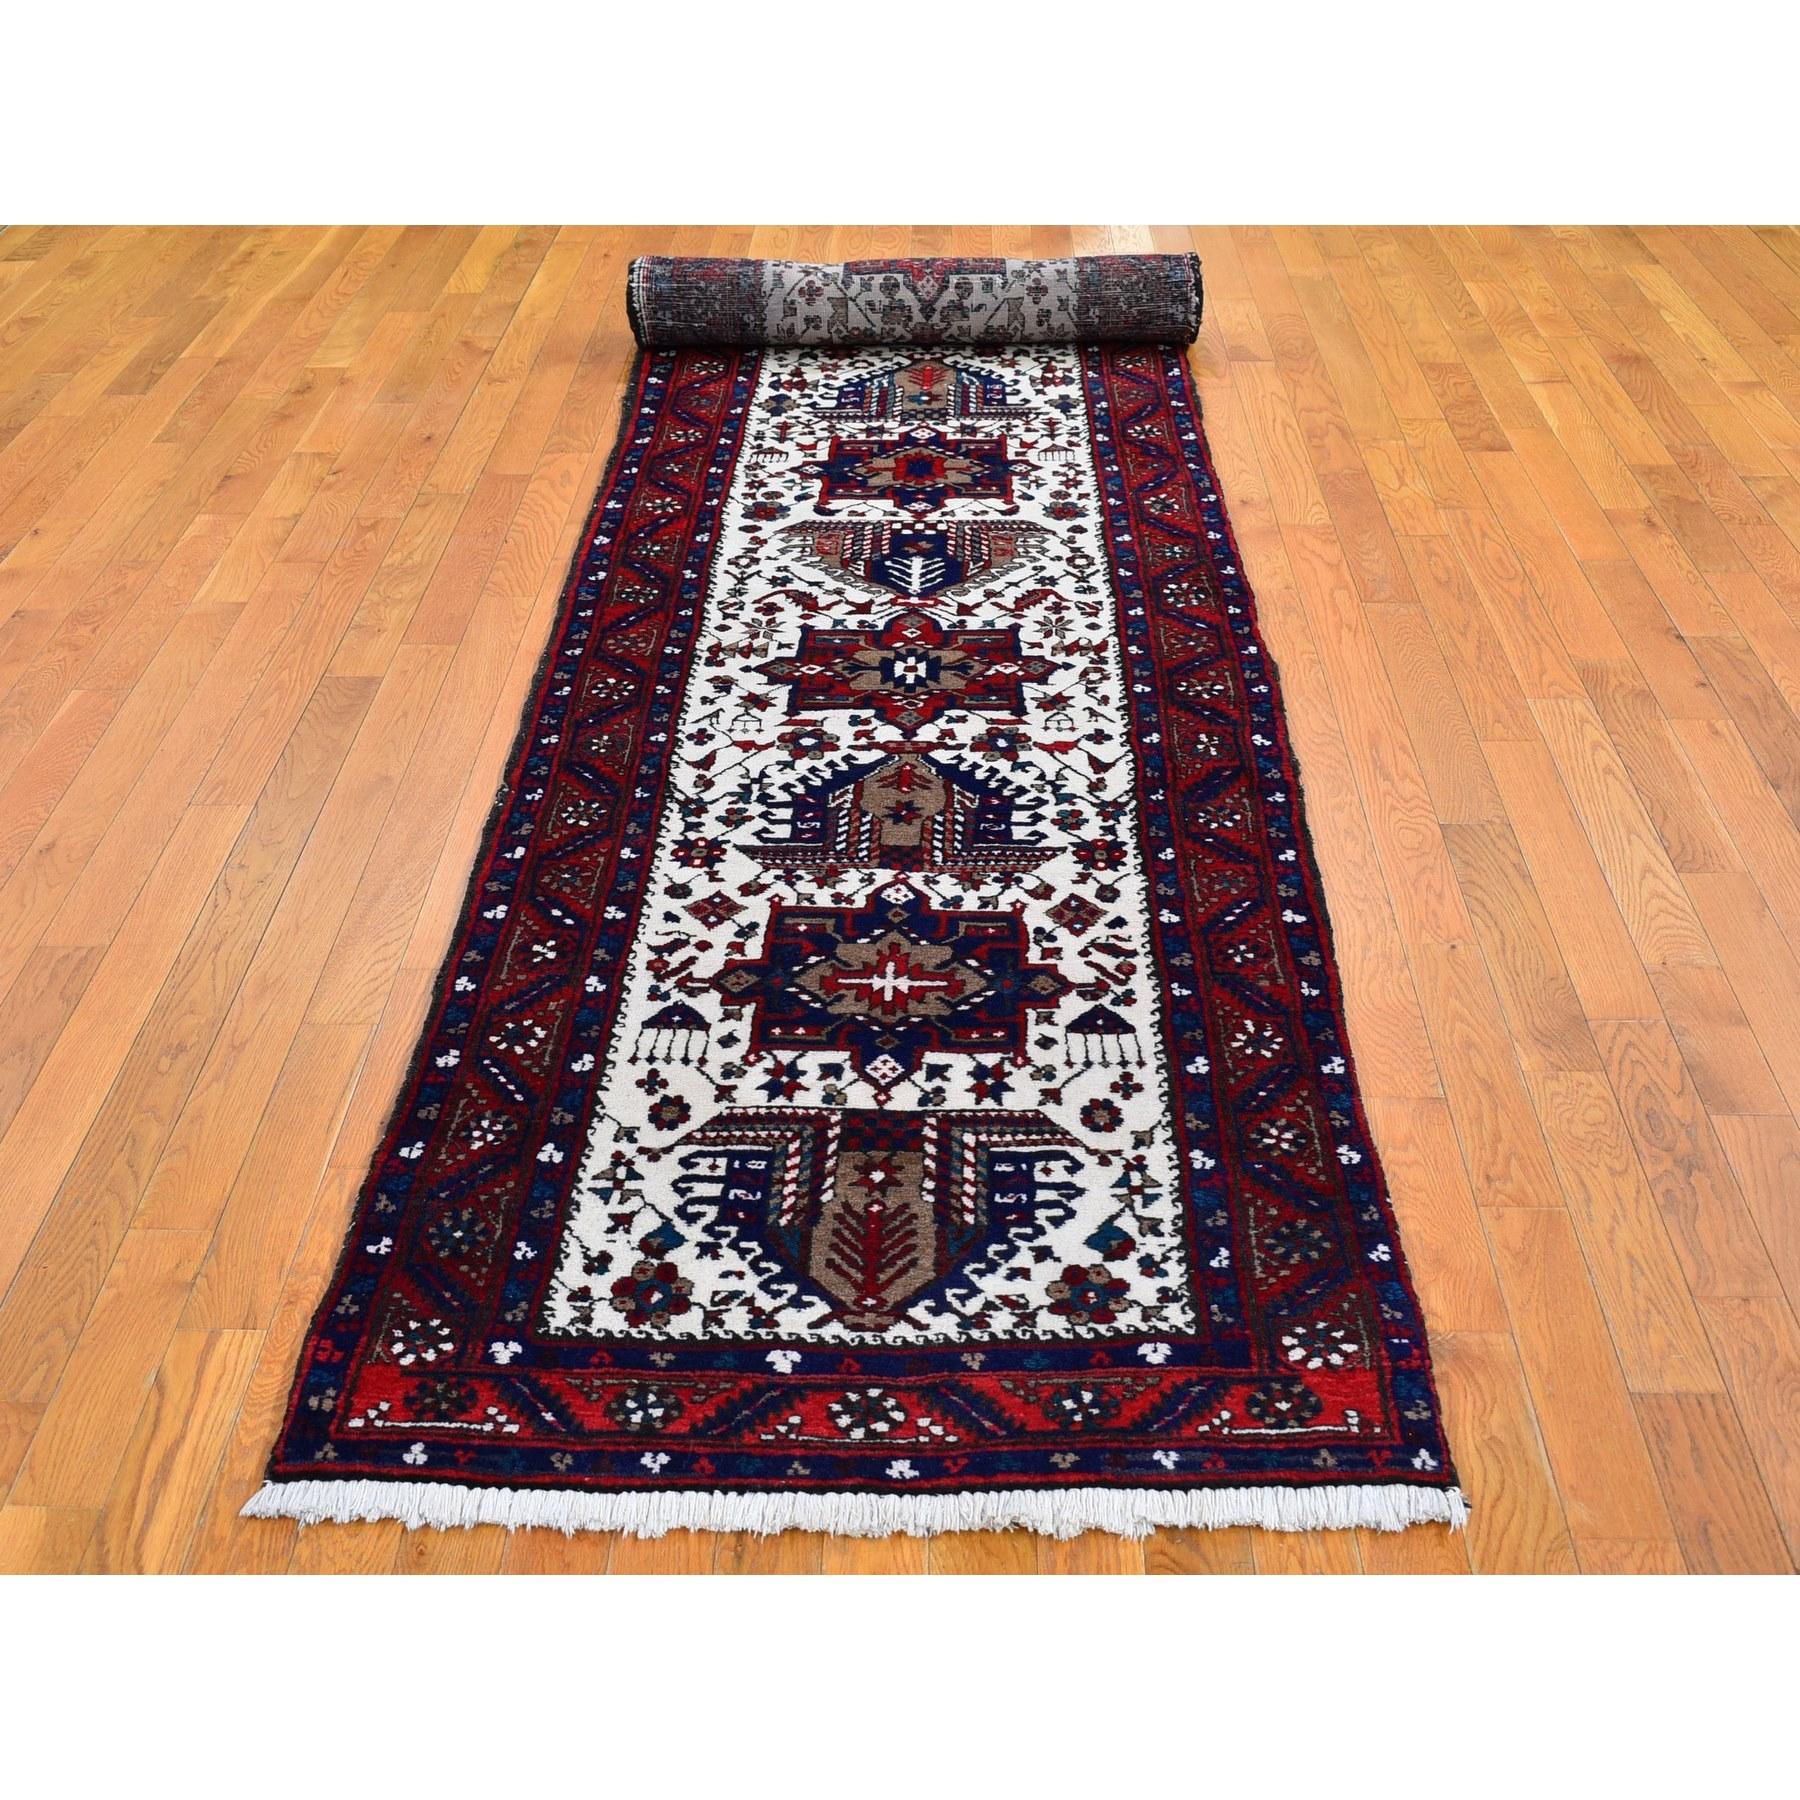 This fabulous hand-knotted carpet has been created and designed for extra strength and durability. This rug has been handcrafted for weeks in the traditional method that is used to make
Exact rug size in feet and inches: 3'3